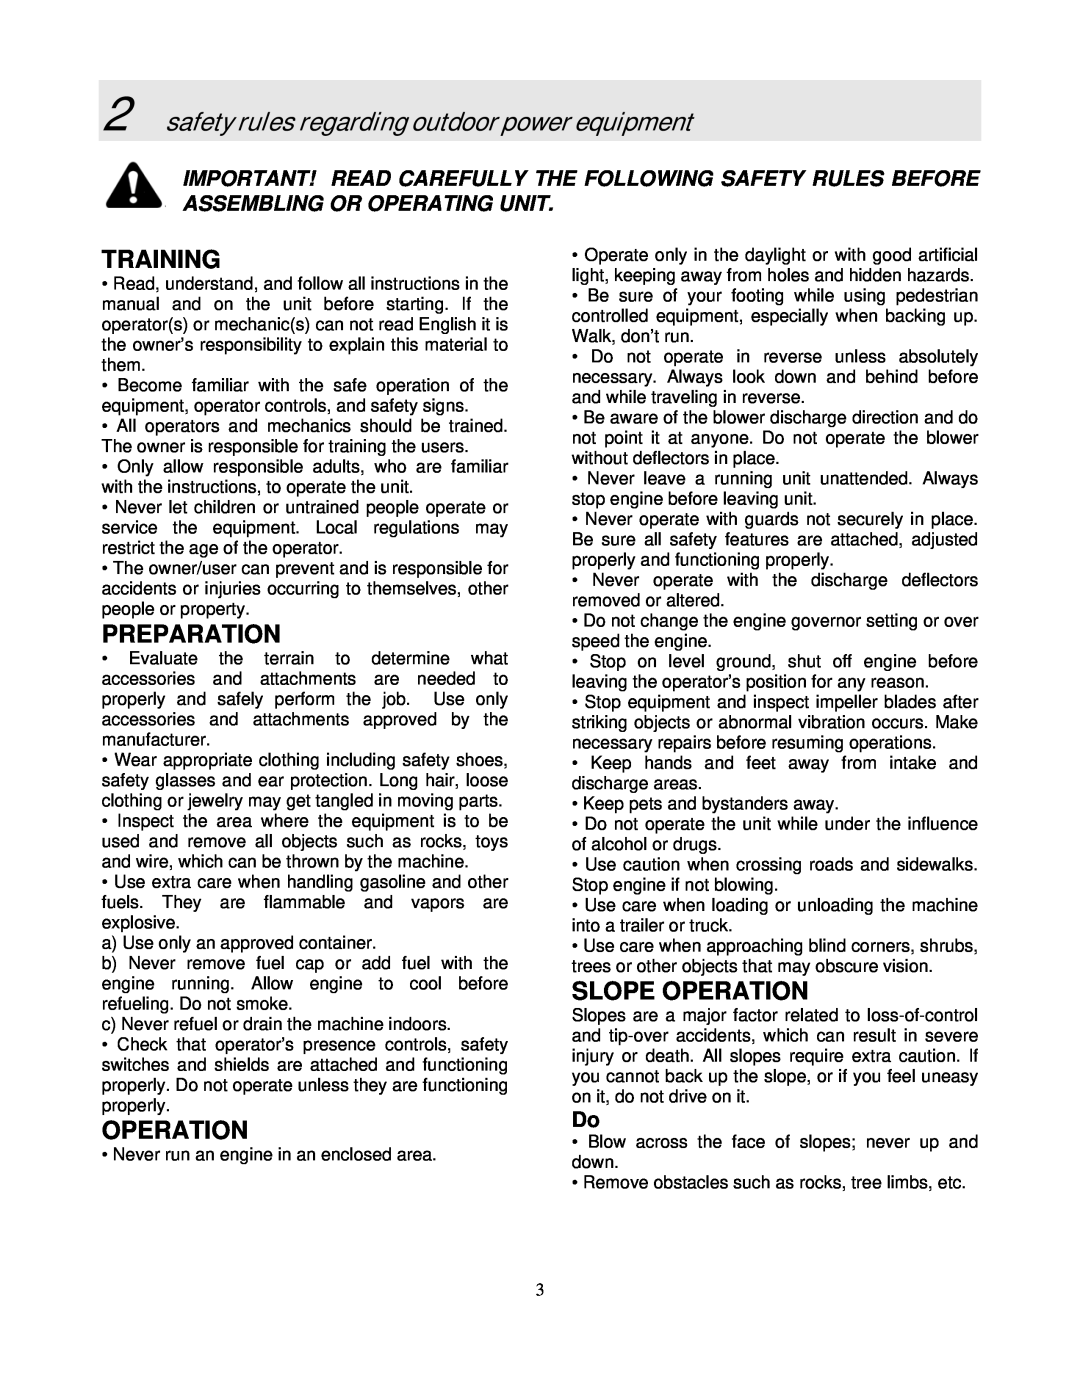 Snapper SLBC55151BV manual safety rules regarding outdoor power equipment, Training, Preparation, Slope Operation 